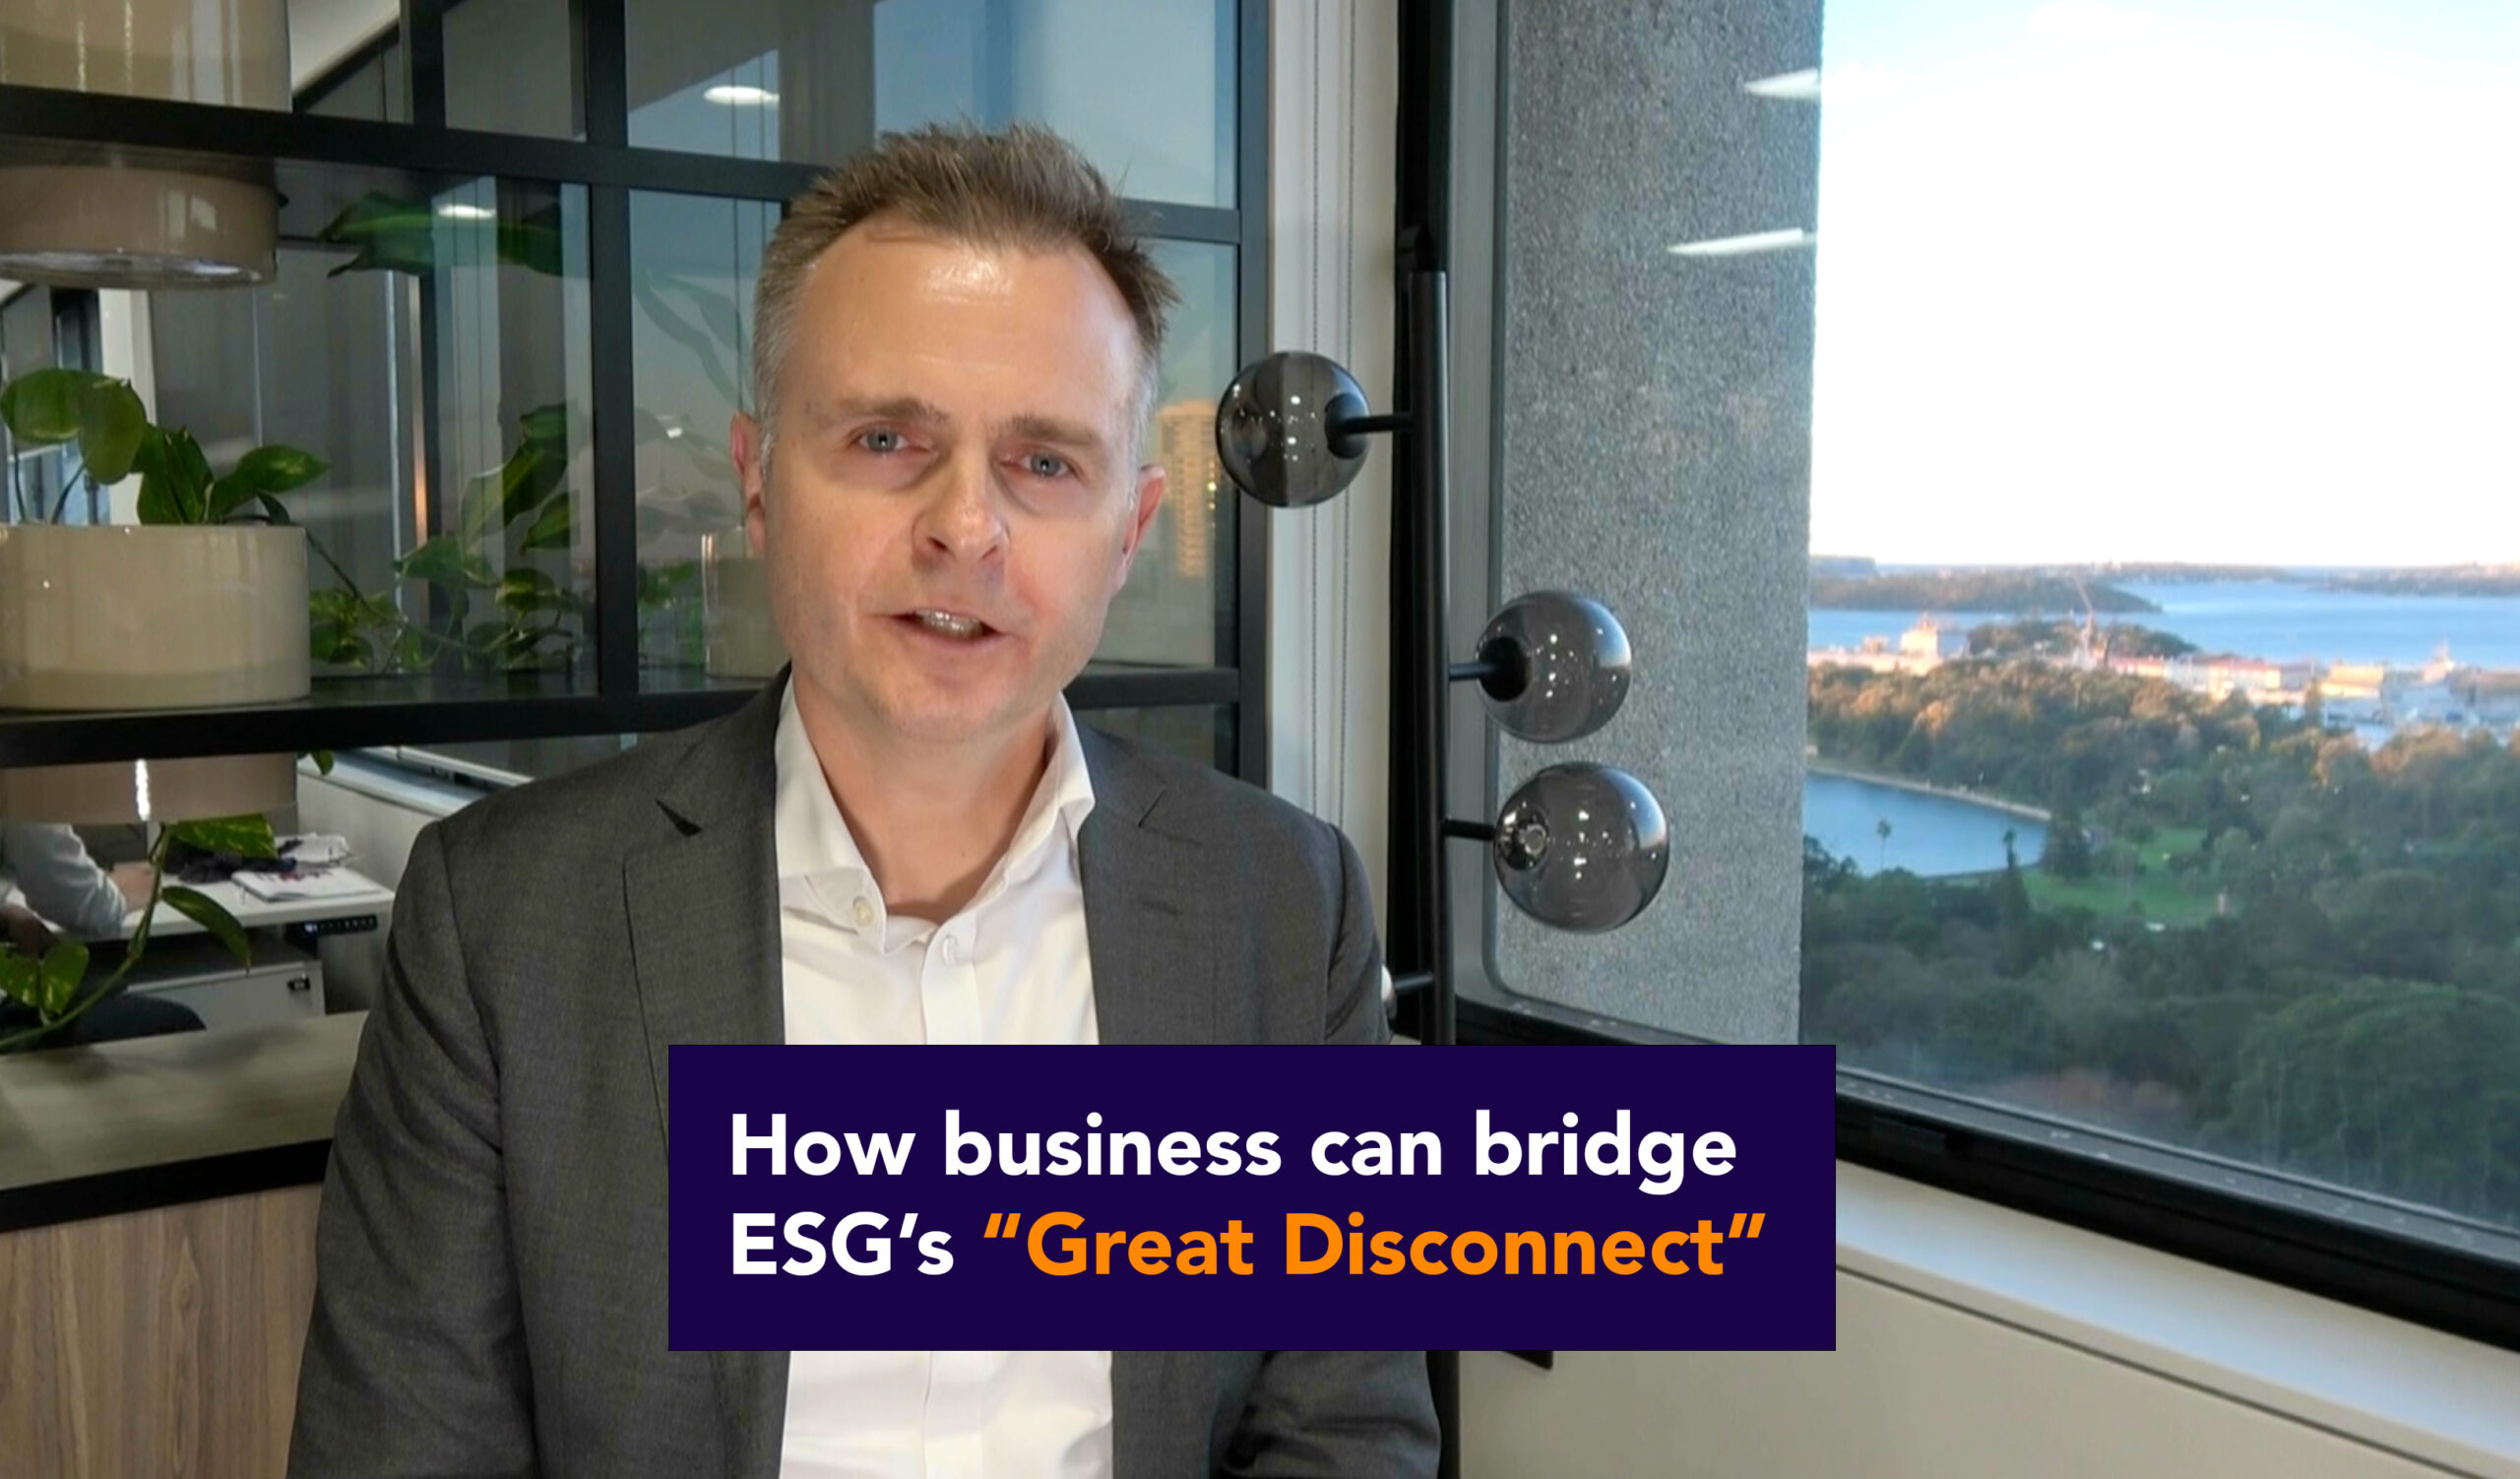 Research sheds light on how business can bridge ESG’s “Great Disconnect”